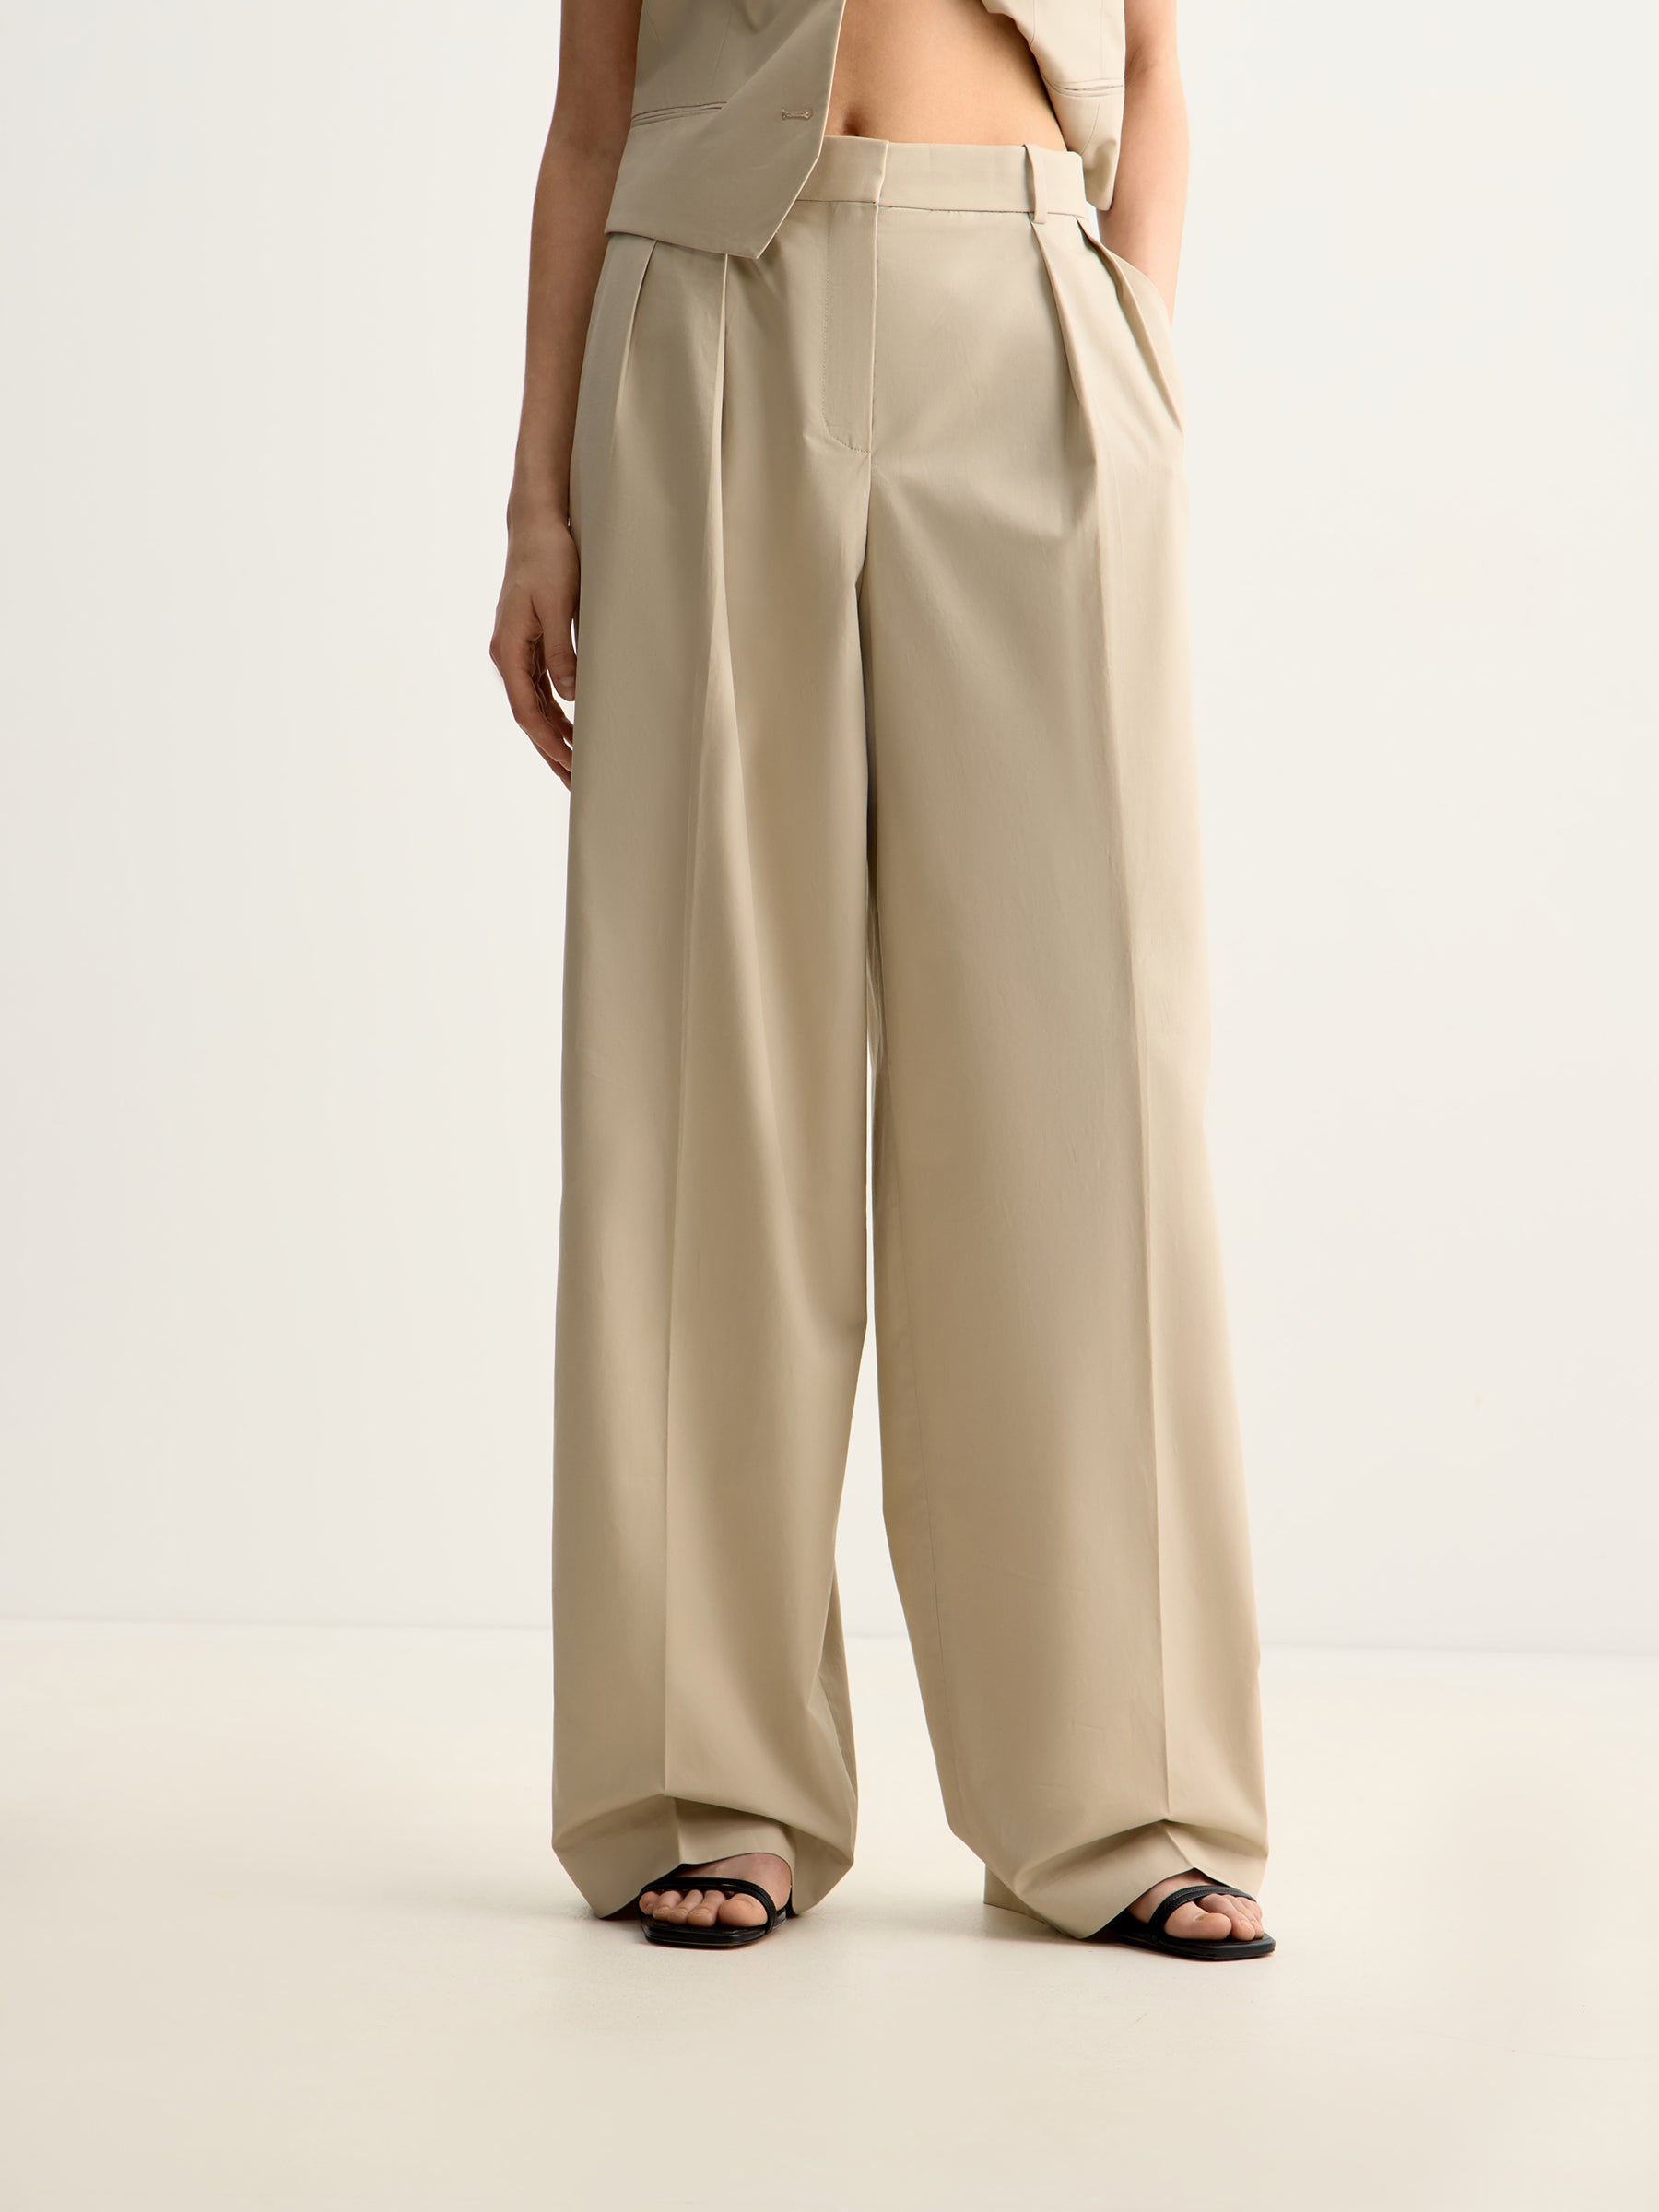 Cotton-lyocell trousers